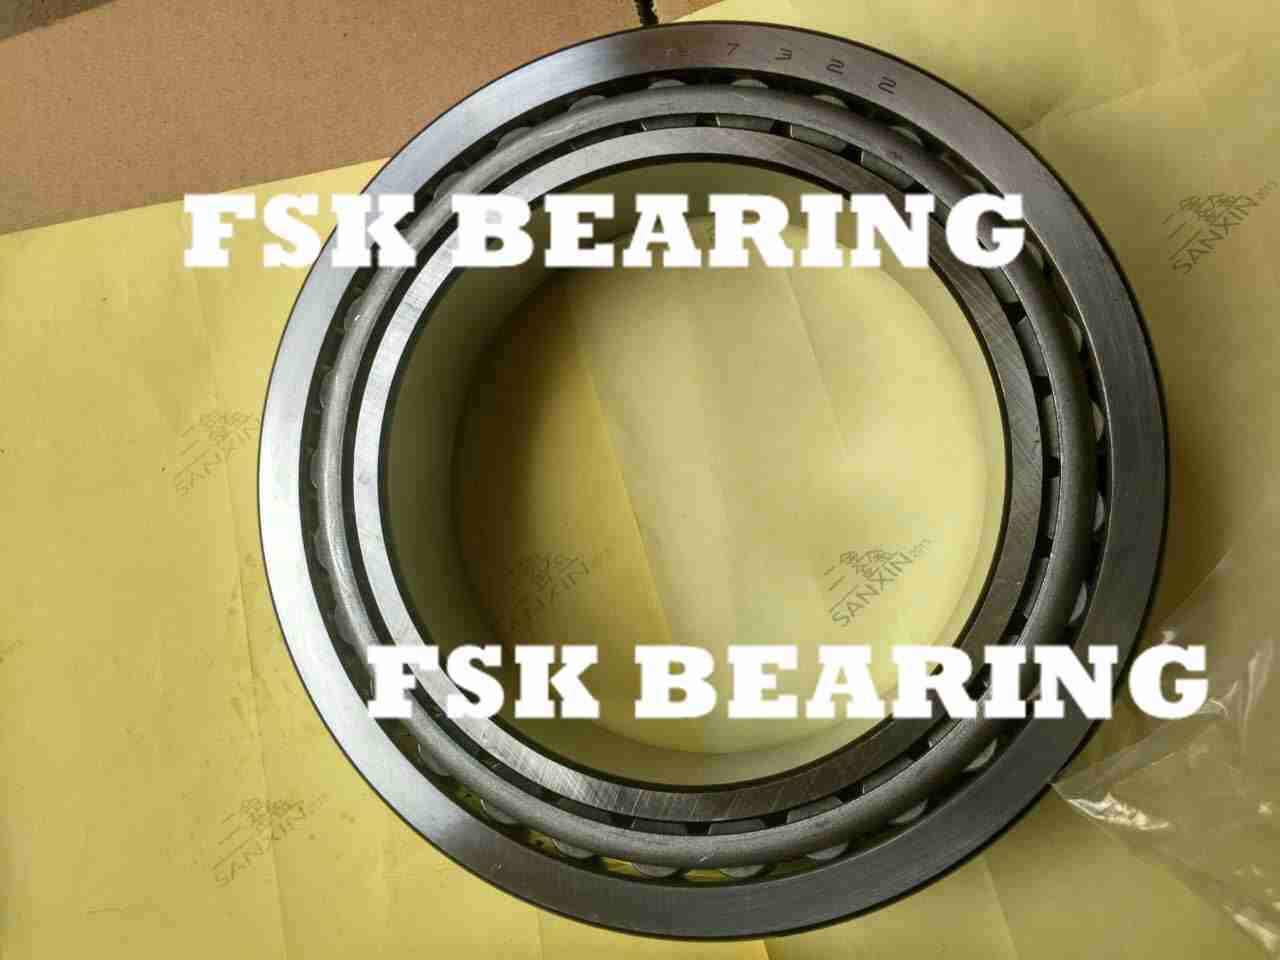 HM261010/HM261049 Tapered Roller Bearing 333.375x469.9x90.488mm